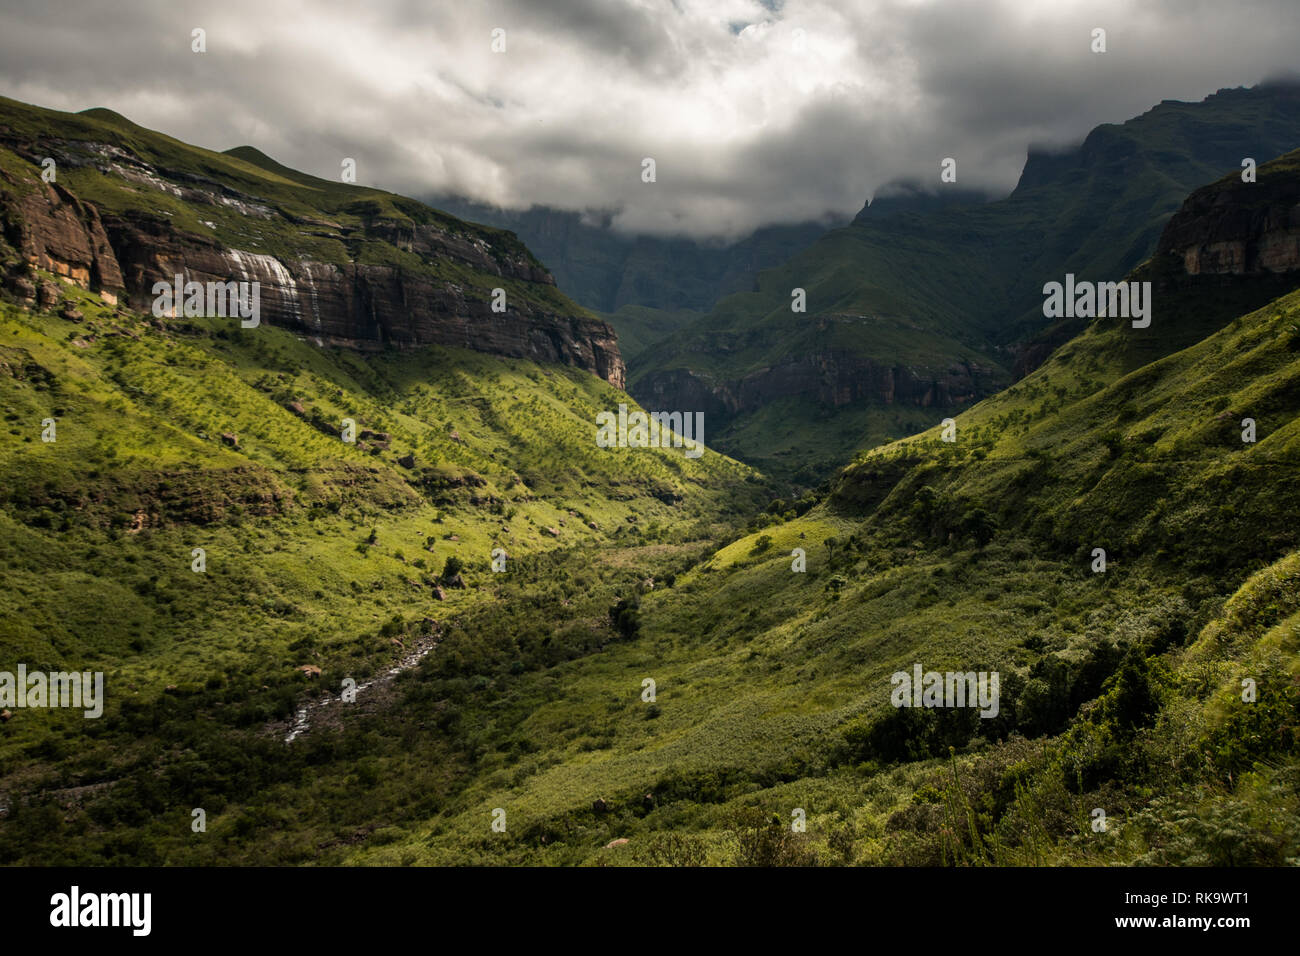 Cliffs, hills and the Tugela River in dramatic afternoon light, along the Tugela Gorge hiking route at the base of the Amphitheatre mountain. Drakensb Stock Photo